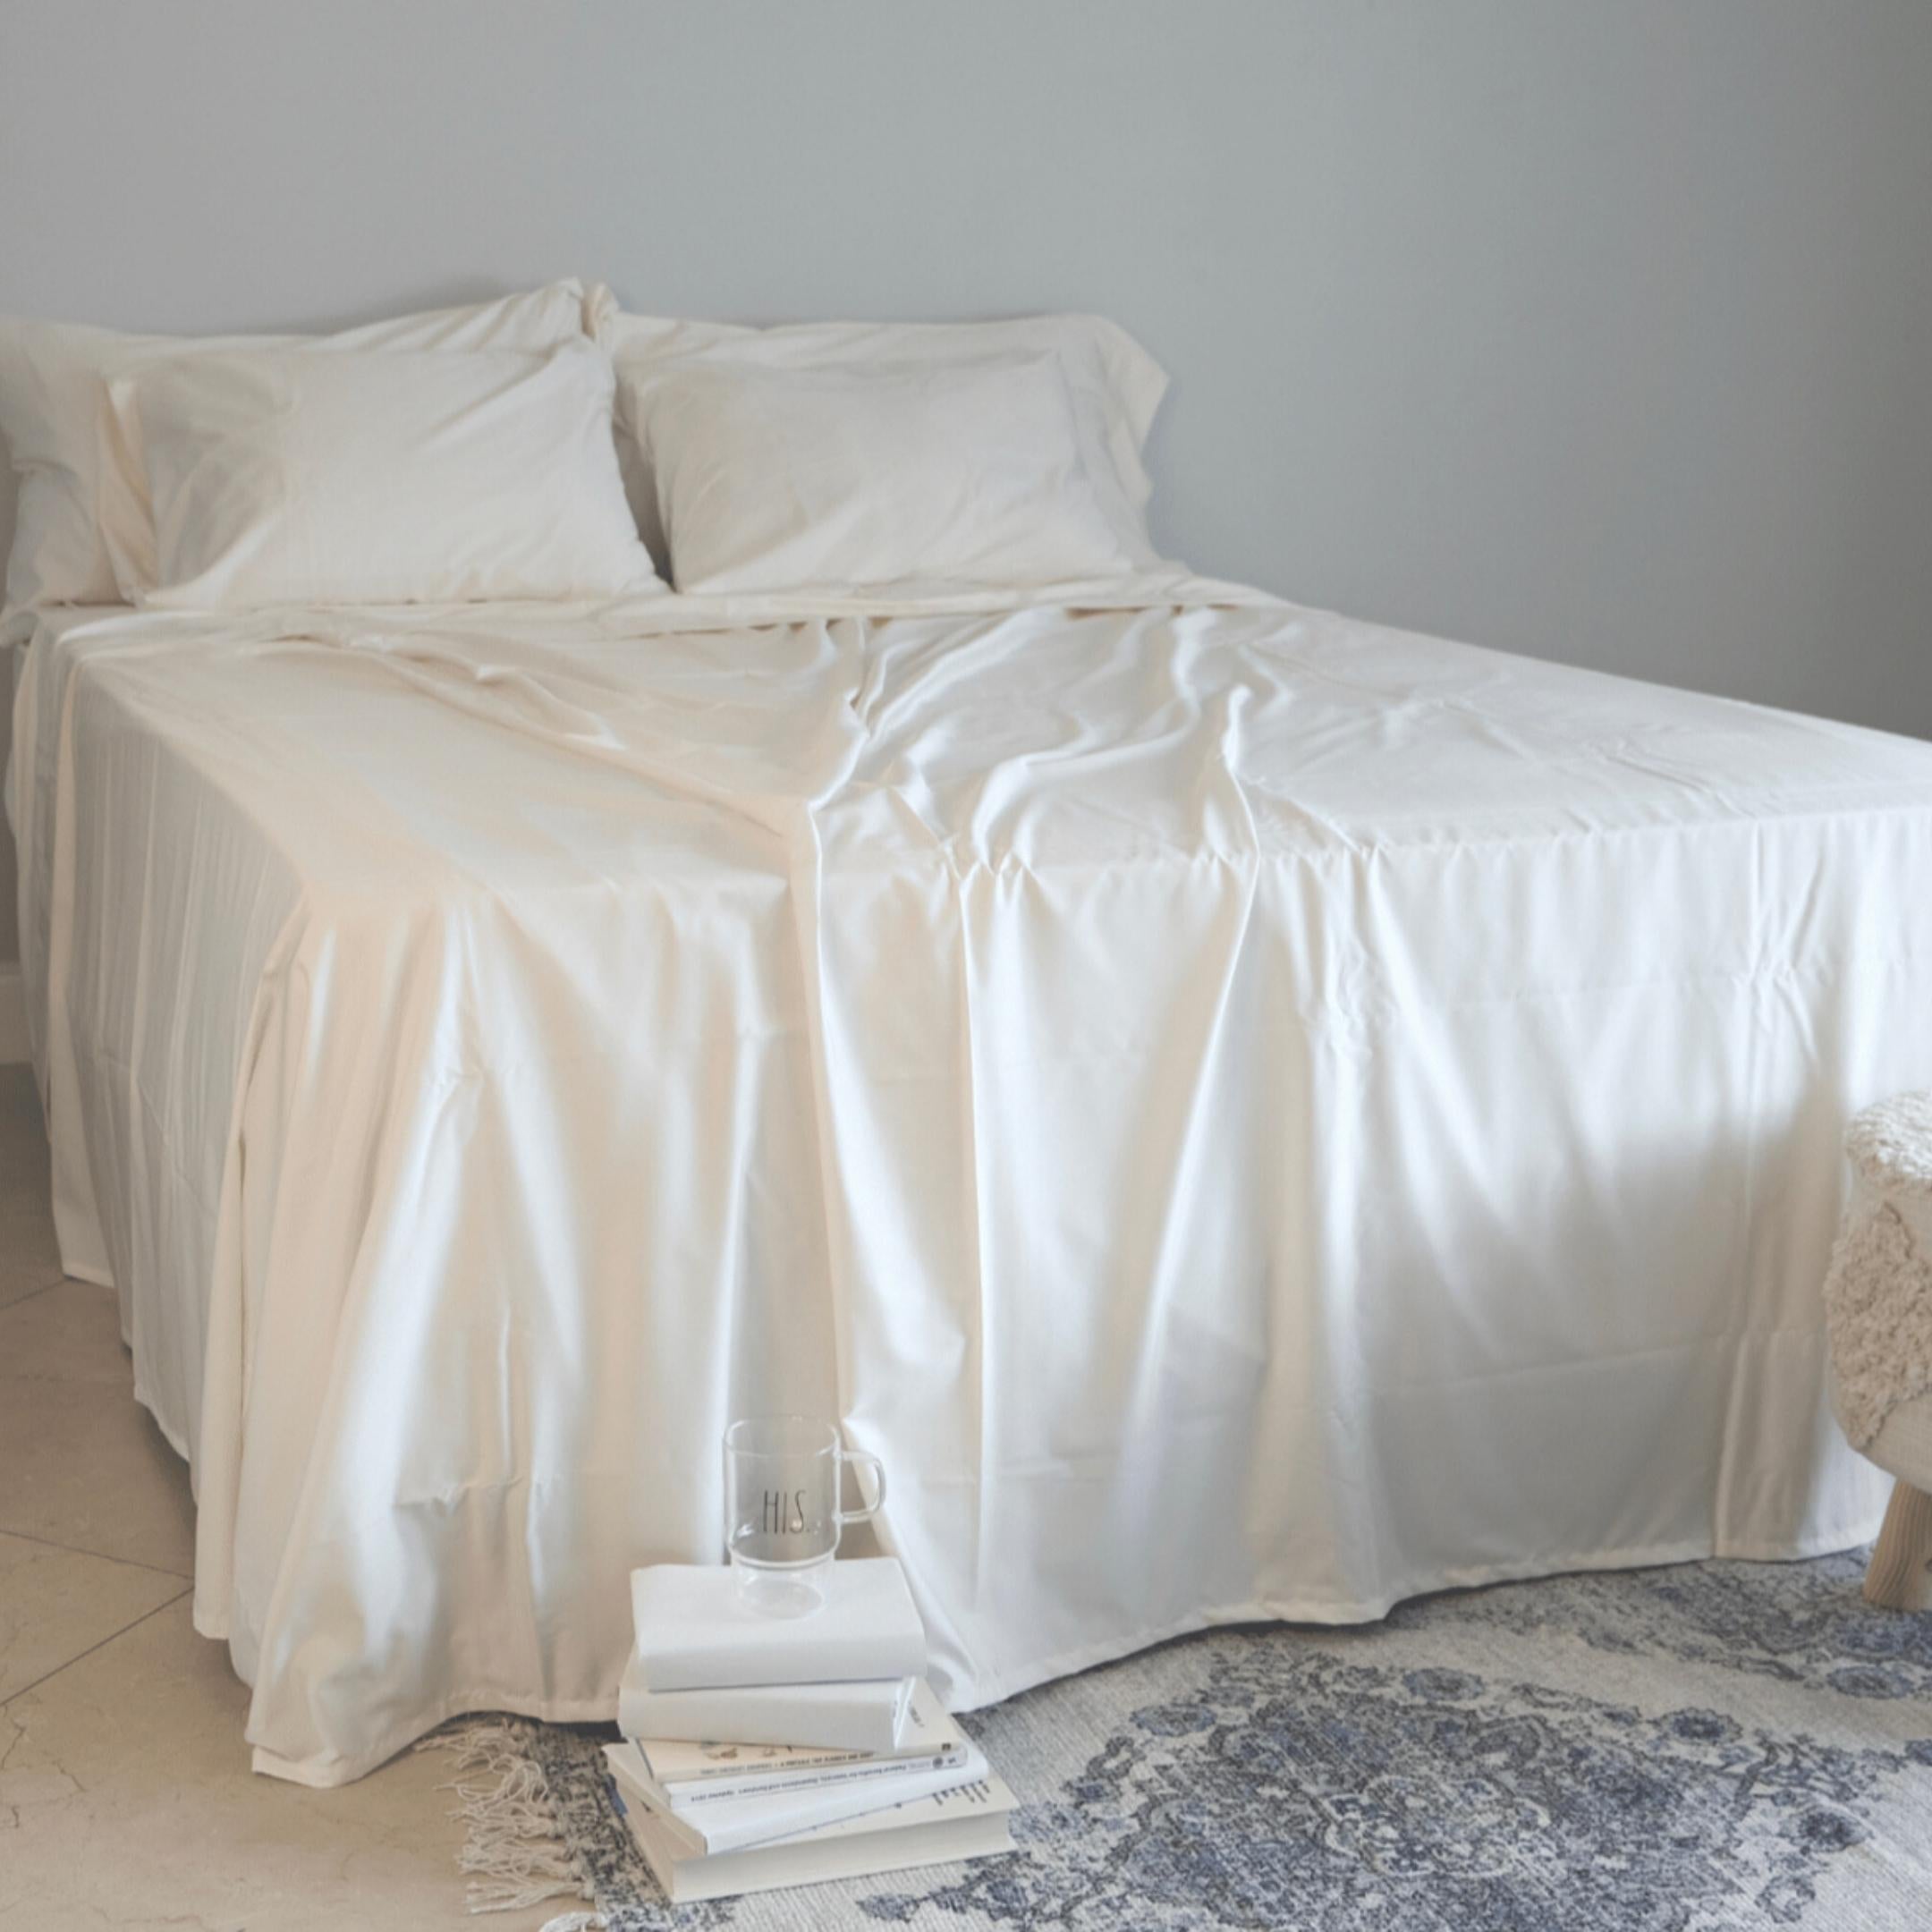 pure organic bamboo bedsheets pillowcases 100% quality best bedding ever - reusable packaging - sustainable materials and fabrics